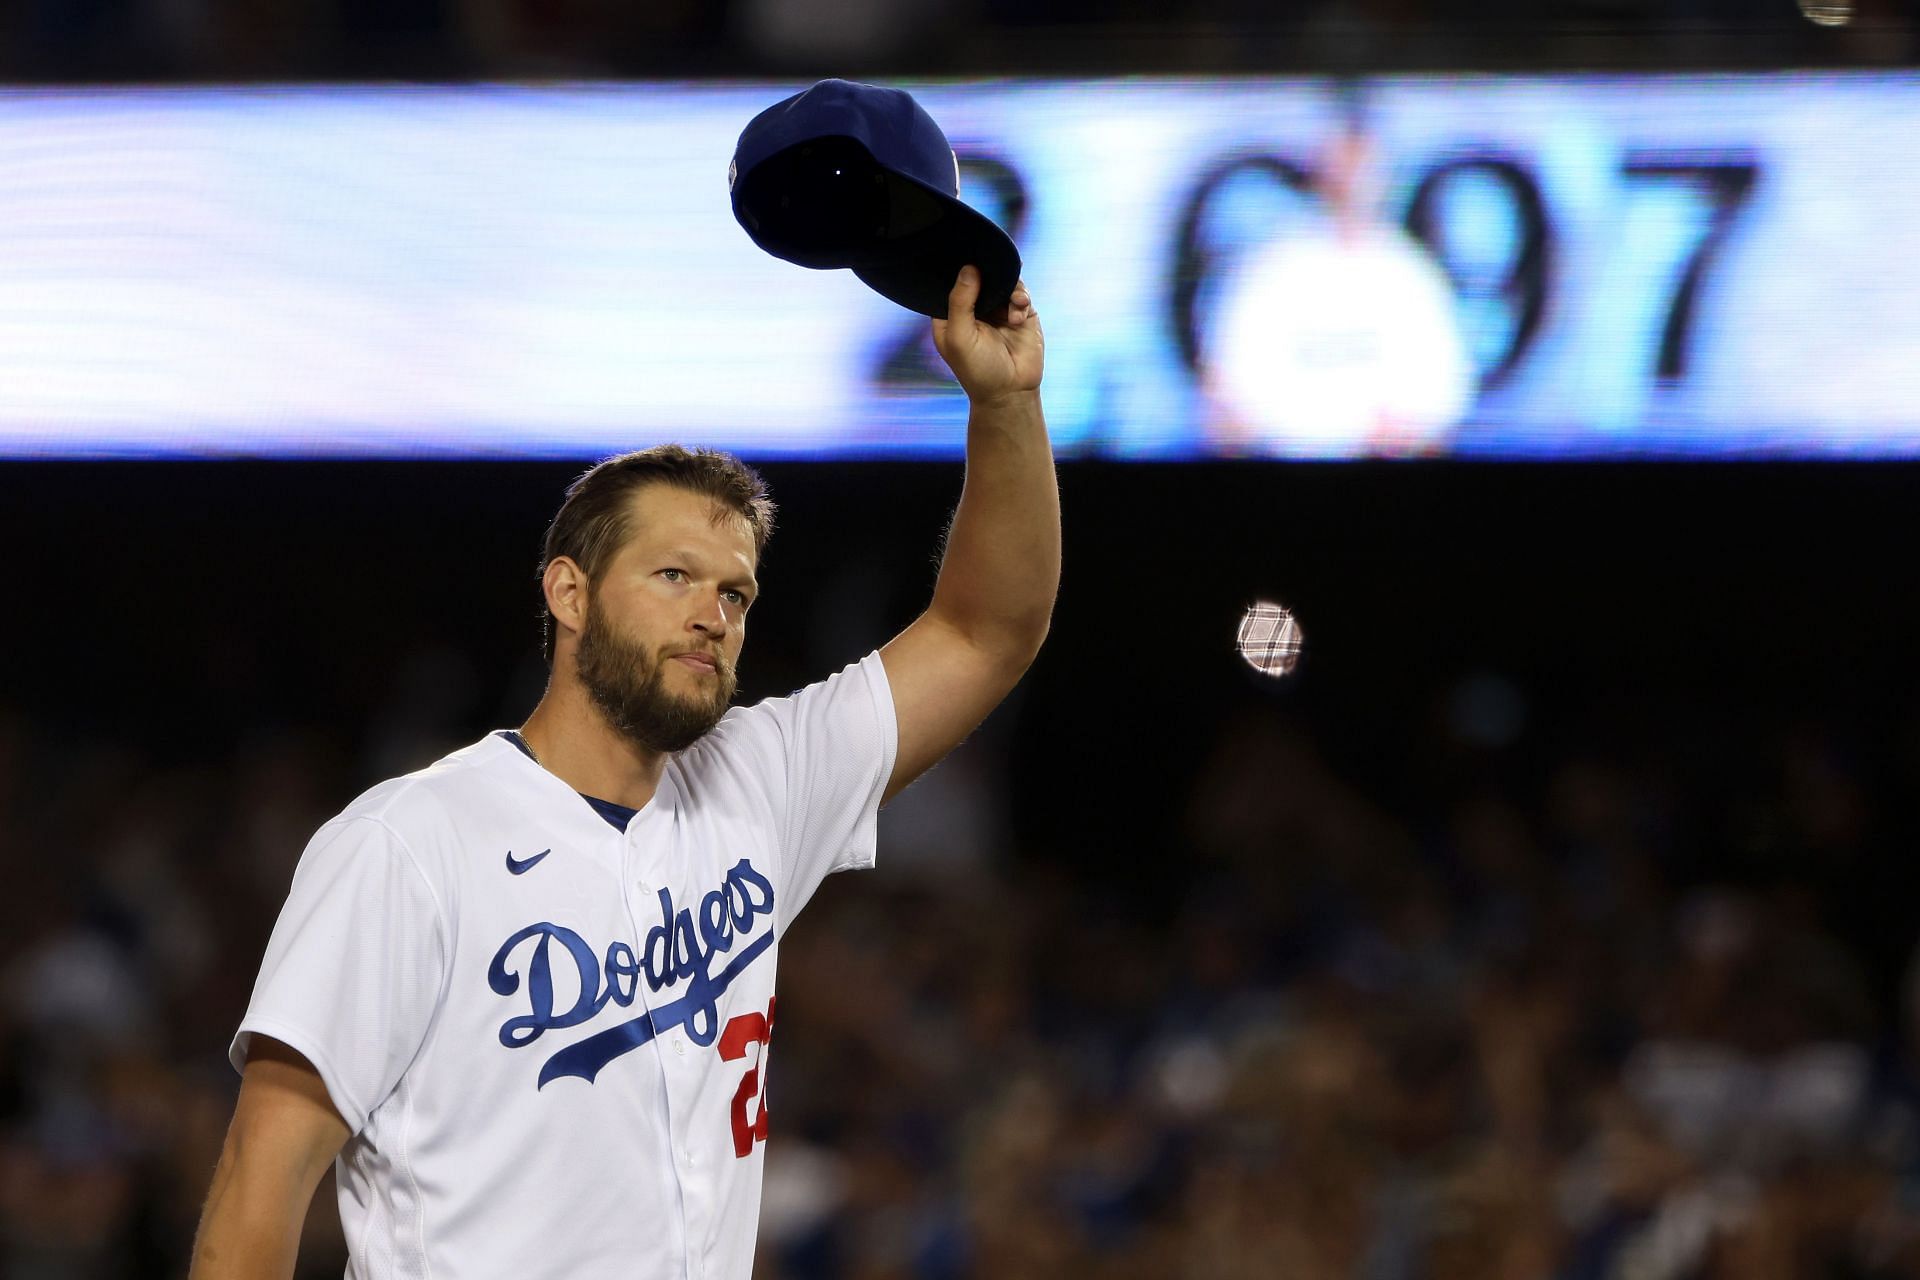 Kershaw tips his cap to the crowd